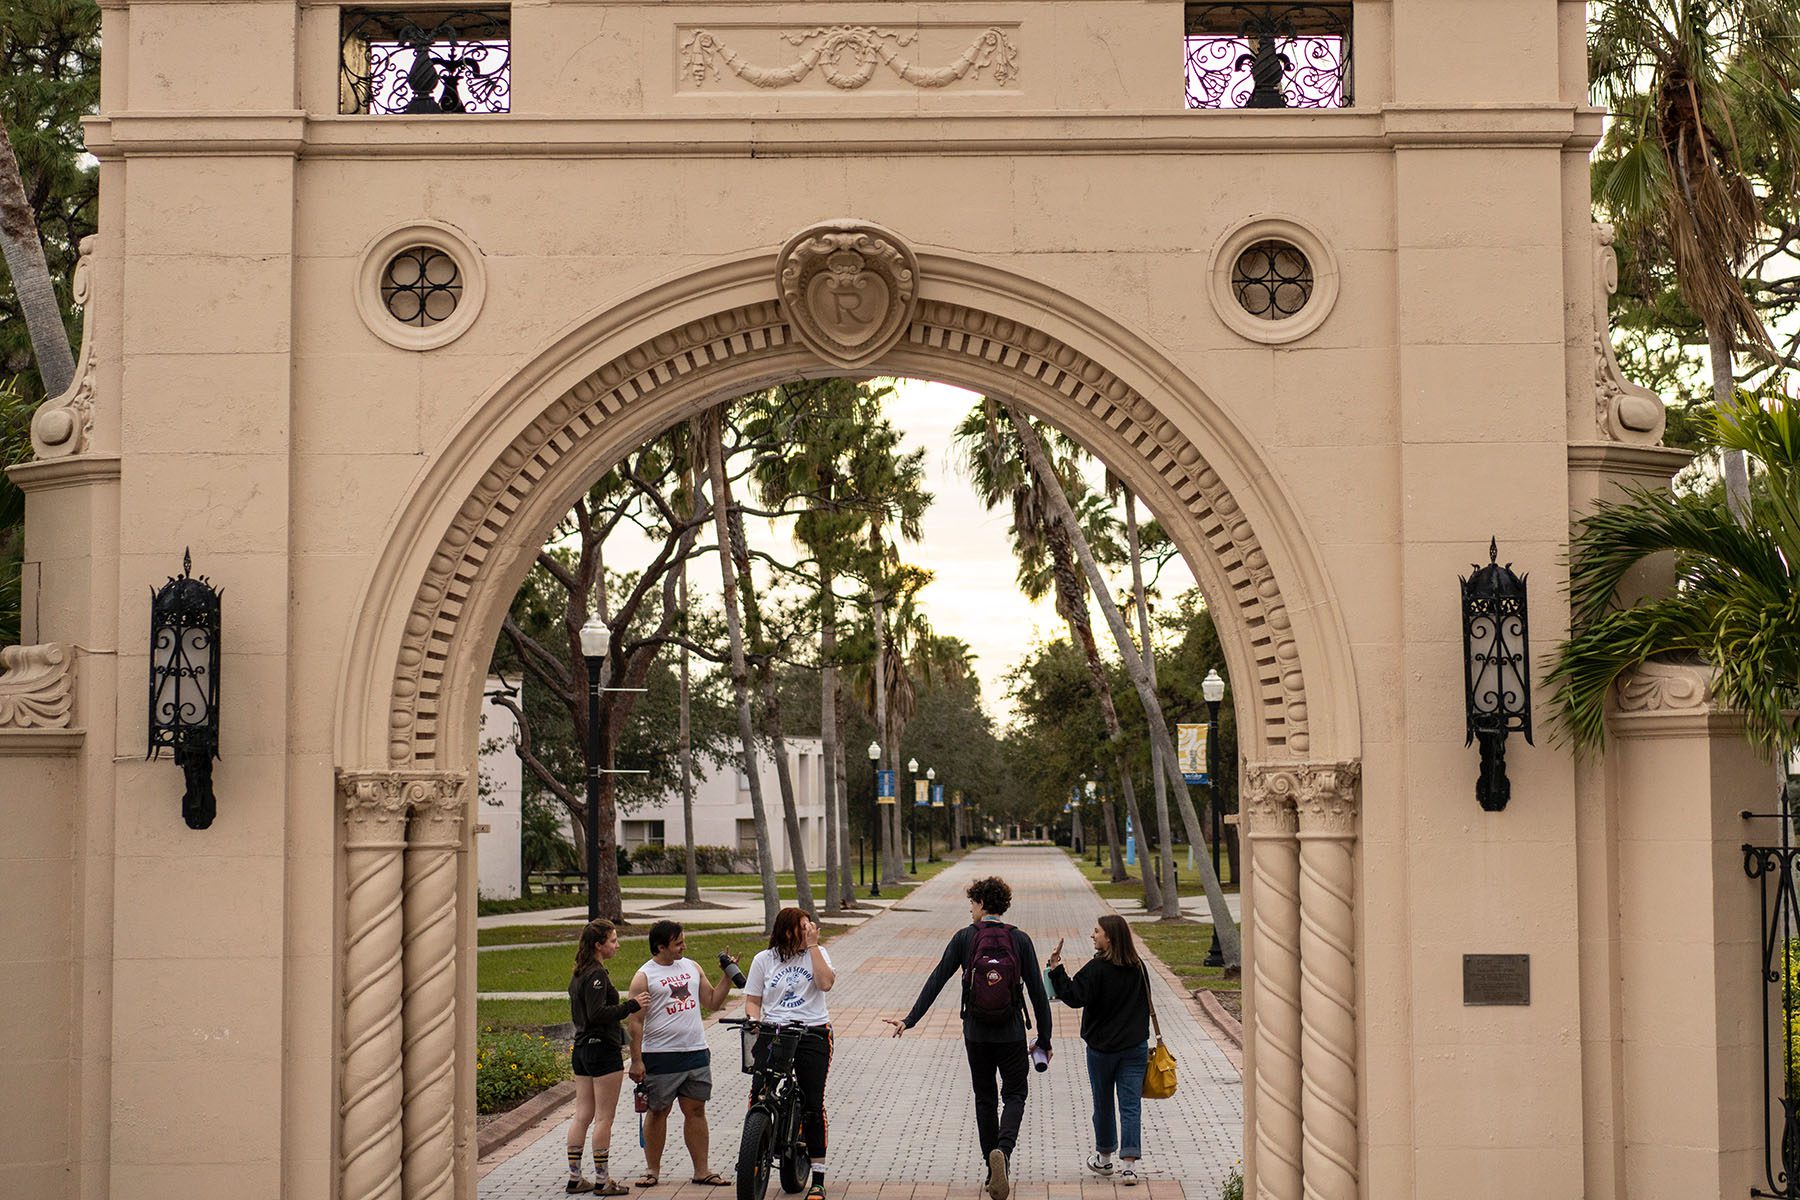 Students on a Florida college campus in Sarasota, Florida in January 2023.